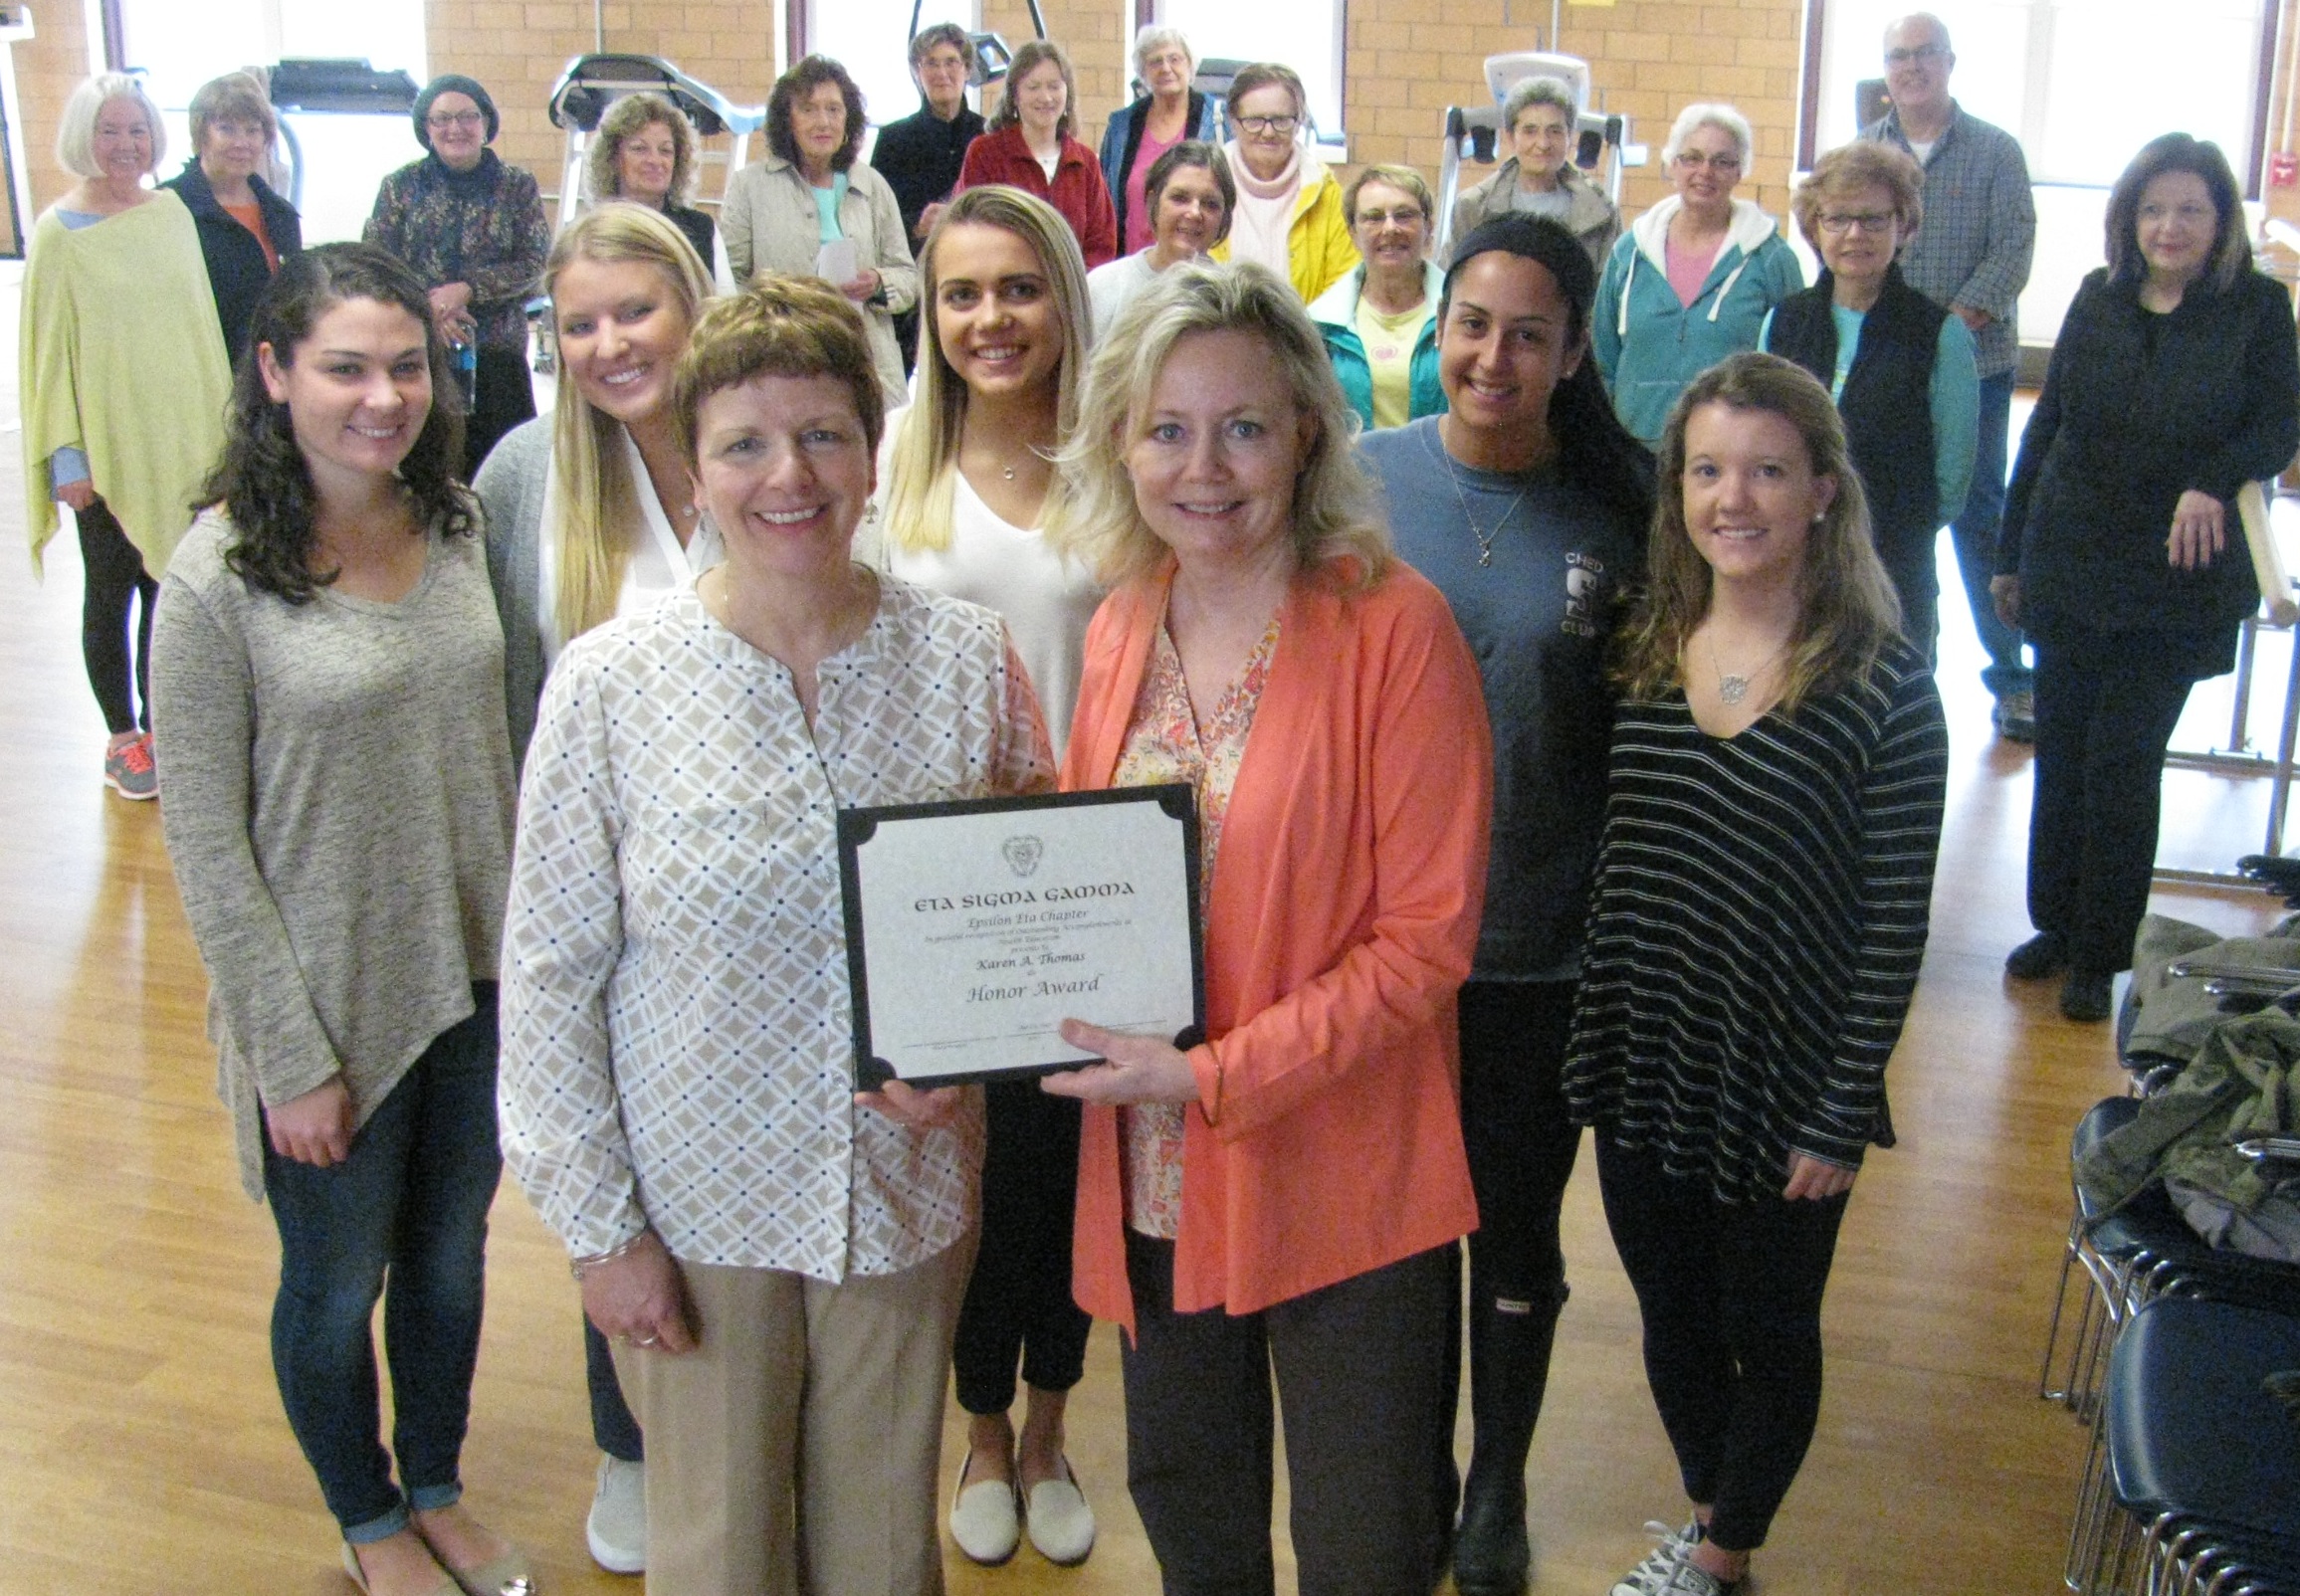 The University of Scranton’s Community Health Education Honor Society, Eta Sigma Gamma, presented health educator Karen A. Thomas with the Outstanding Accomplishments in Health Education Award at the West Side Active Older Adult Community Center in April. The award is given to individuals or organizations that have made major contributions to the health education profession through service, education and/or research. The University has partnered with Thomas since 2007 to support the community center’s Growing Stronger Program as a community-based learning project. First row, from left, Thomas, Lackawanna County’s Penn State Extension, and Debra L. Fetherman, Ph.D., the University’s community health education program director and the honor society’s faculty advisor. Second row: University community health education majors Mary Cash, Bayside, New York; Amanda Peters, Amawalk, New York: Olivia Lada, Wayne, New Jersey; Marisa Ciriello, Hicksville, New York; and Maribeth Keith, King of Prussia.